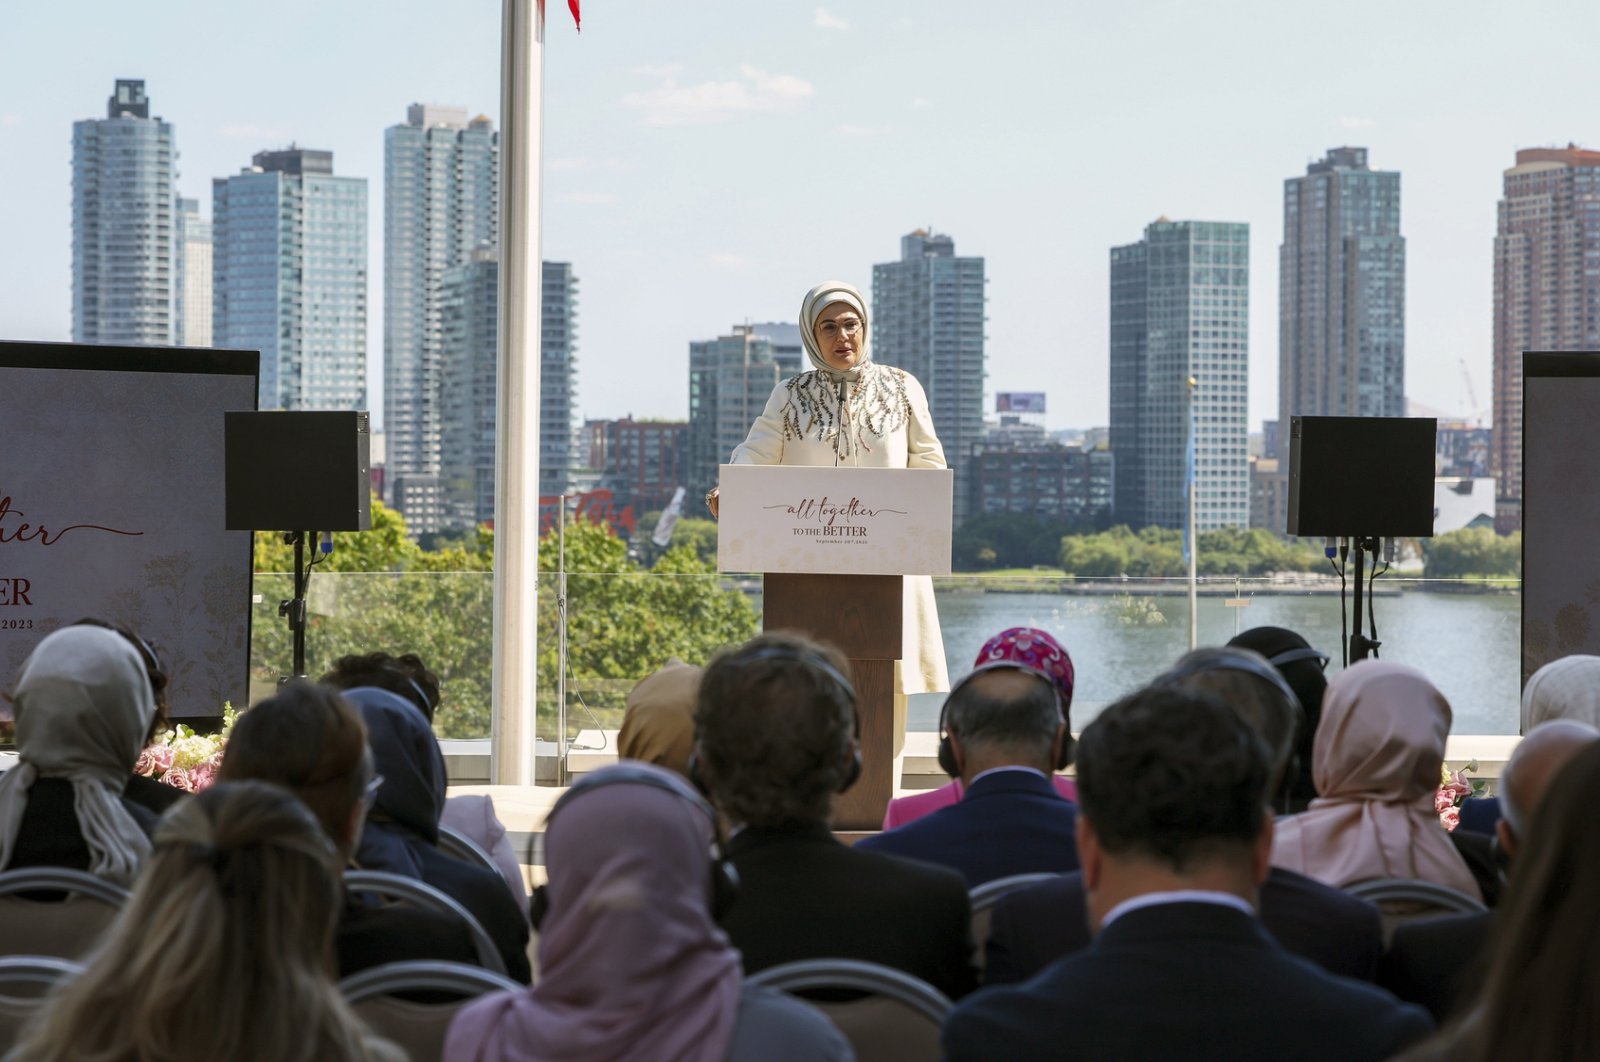 Turkish first lady Emine Erdoğan speaks at the &quot;All Together, to the Better&quot; event in New Yok, U.S., Sept. 20, 2023. (DHA Photo)